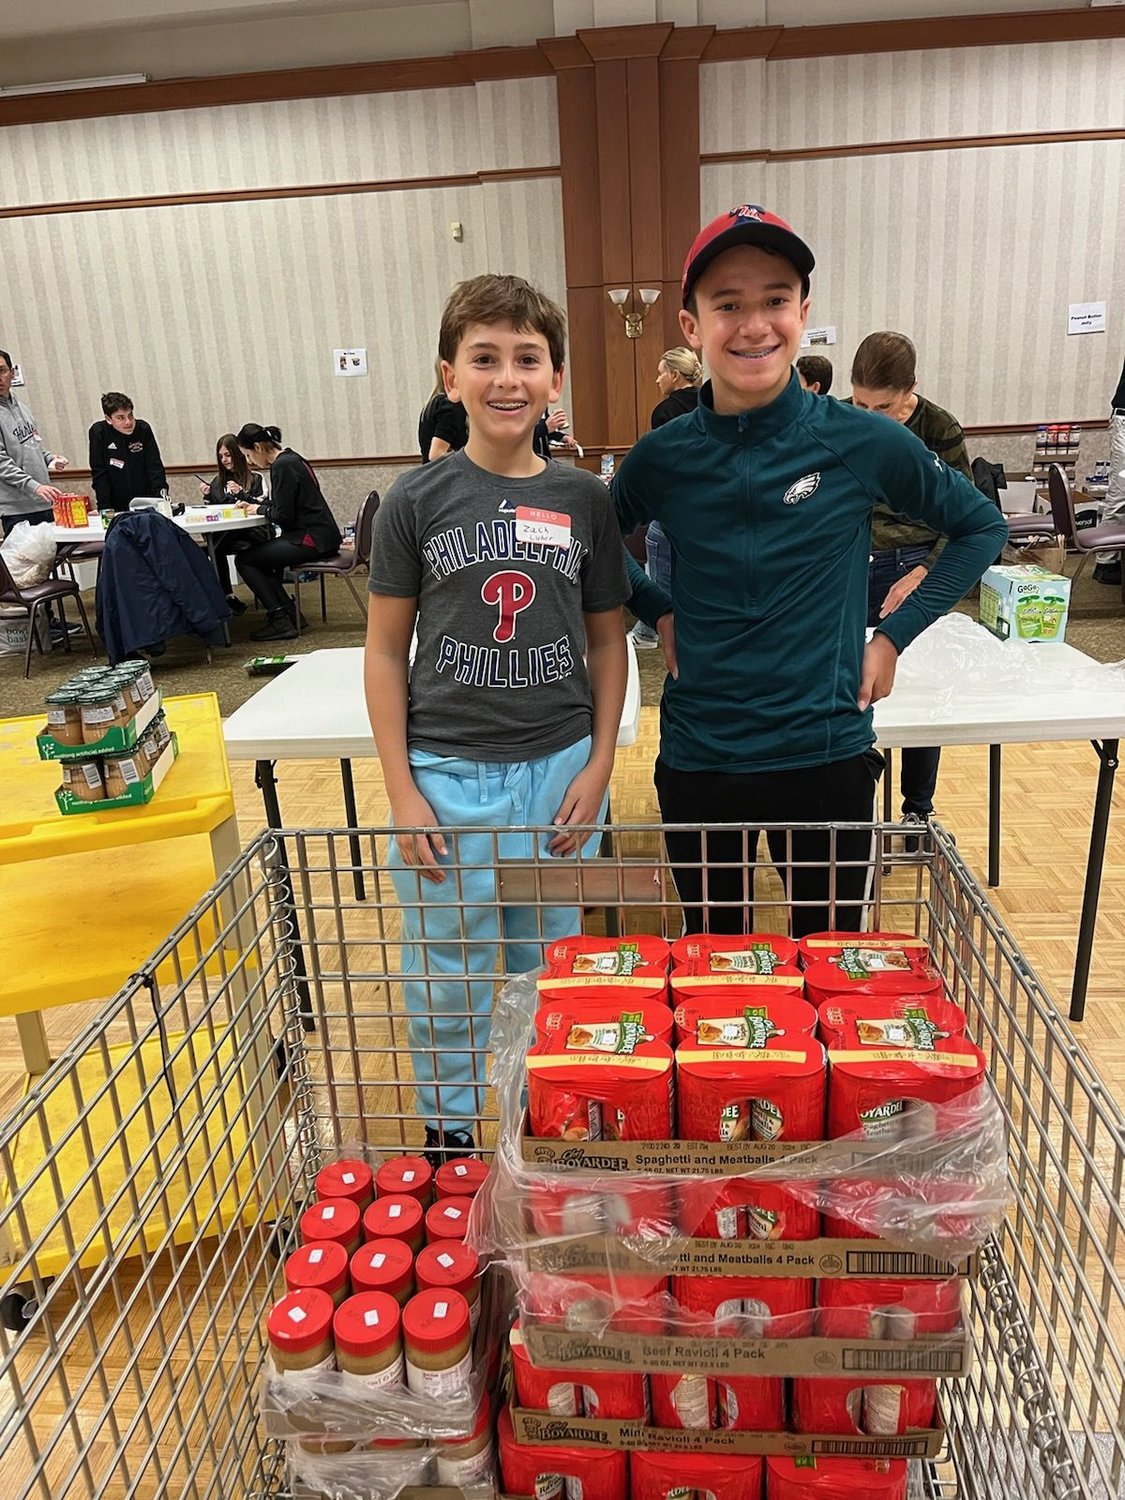 Students, adults and families participated in a food sorting event at Shir Ami Reform Synagogue of Newtown in October. Helping to sort, label and transport over 15,000 pounds of donated food were Zach Luber, 13, left, and Jeremy Leon, 13, both of Newtown.